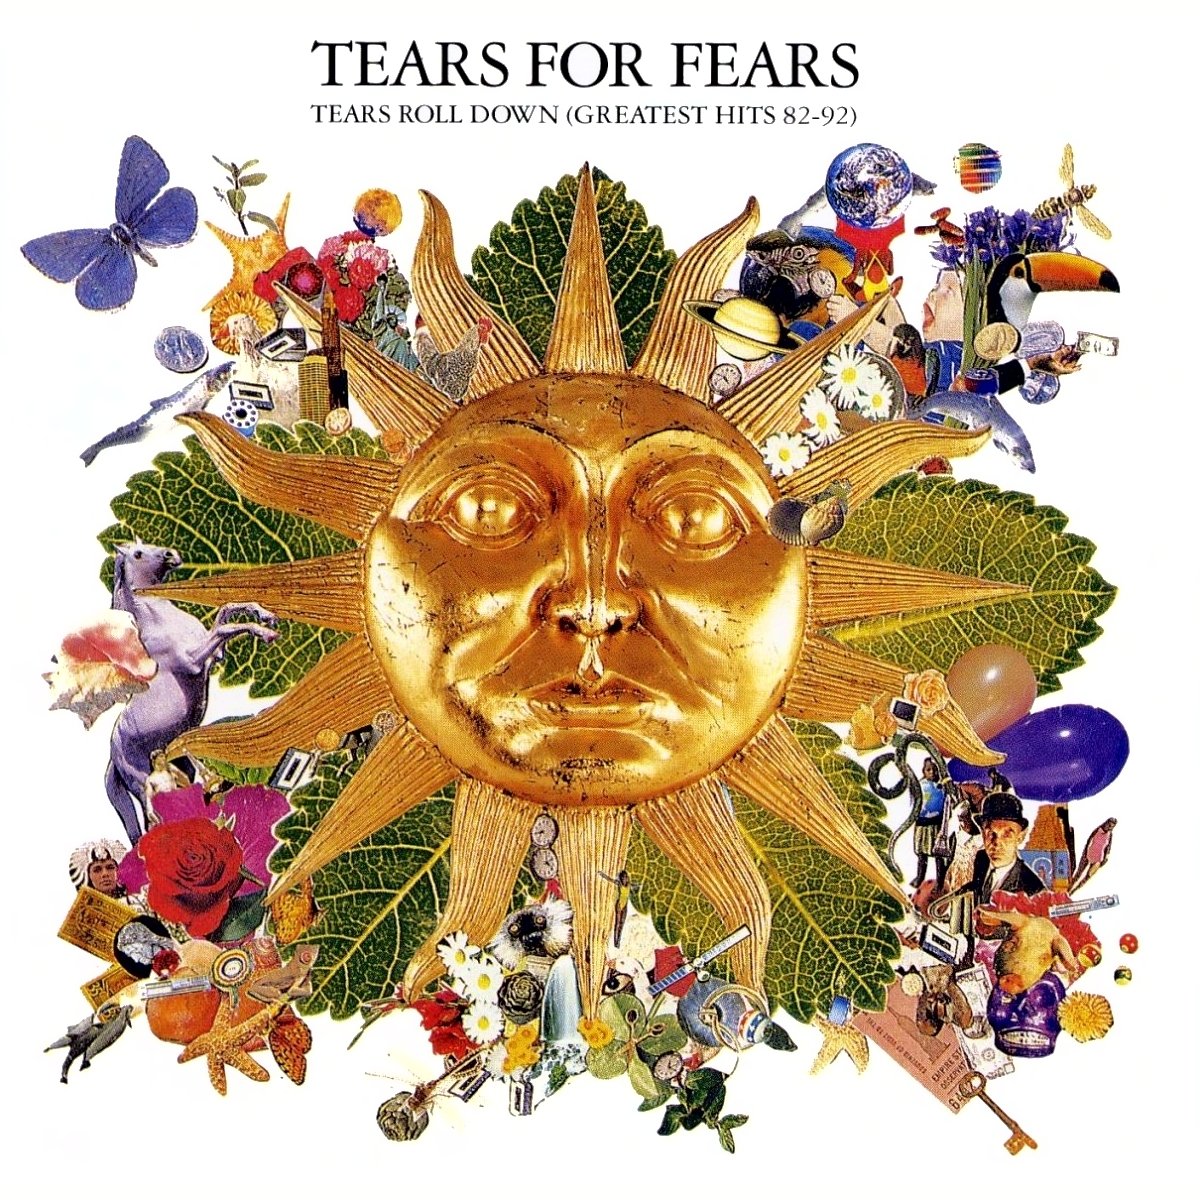 Woman In Chains - Tears For Fears [Remastered] 